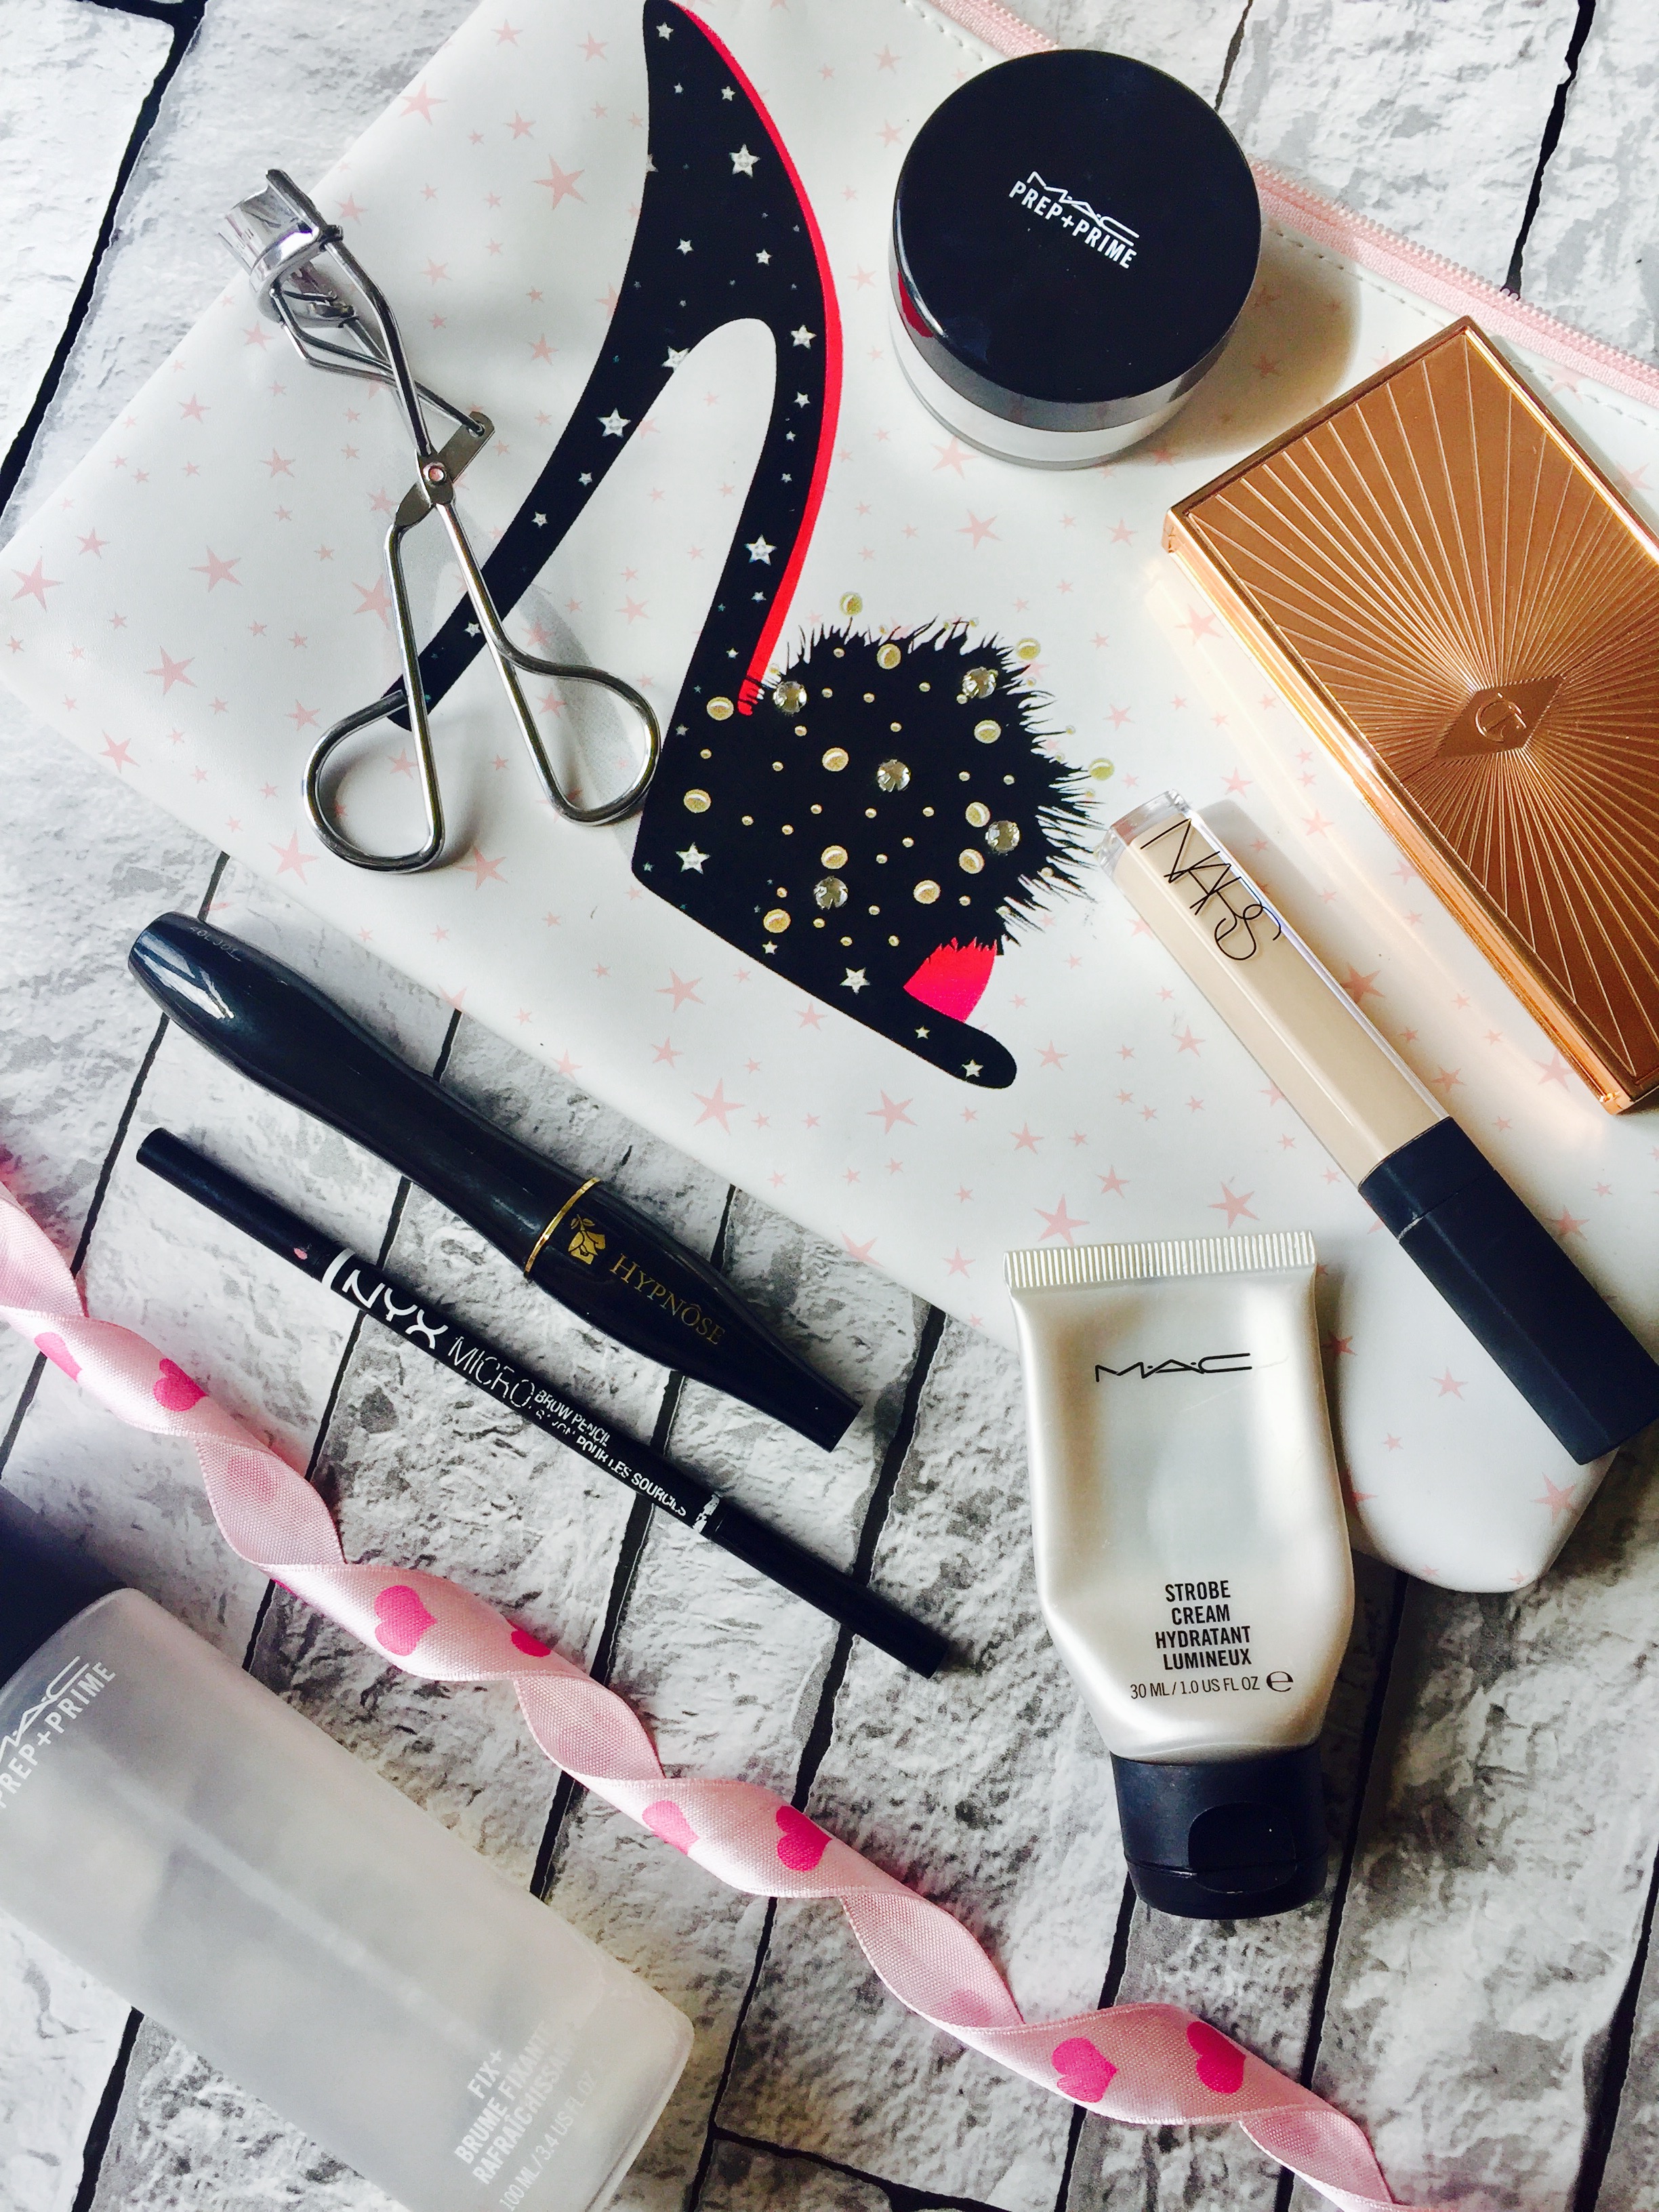 Everyday makeup bag must haves